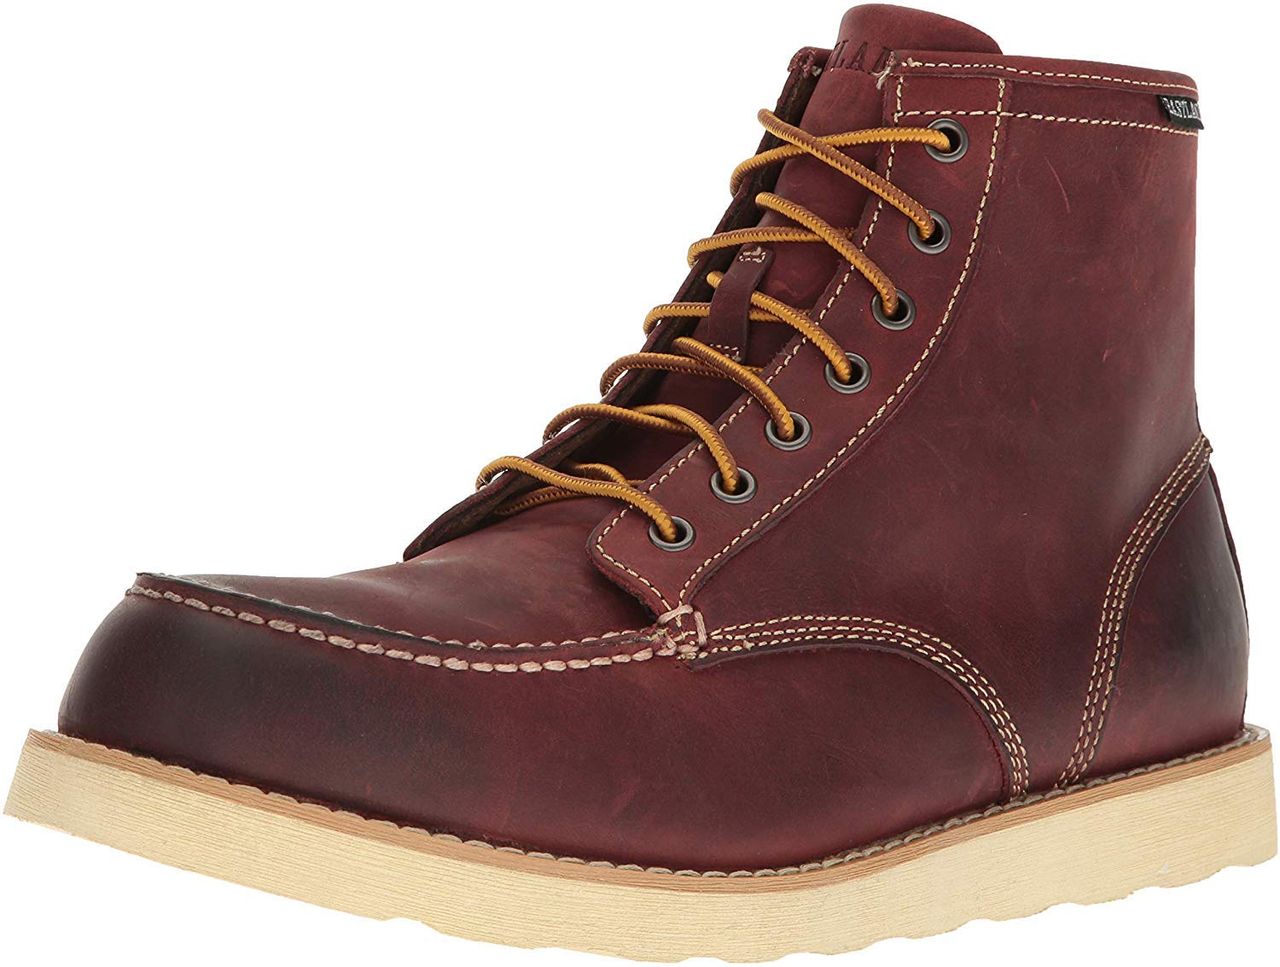 Eastland Men's Lumber Up Chukka Boot - Compare prices